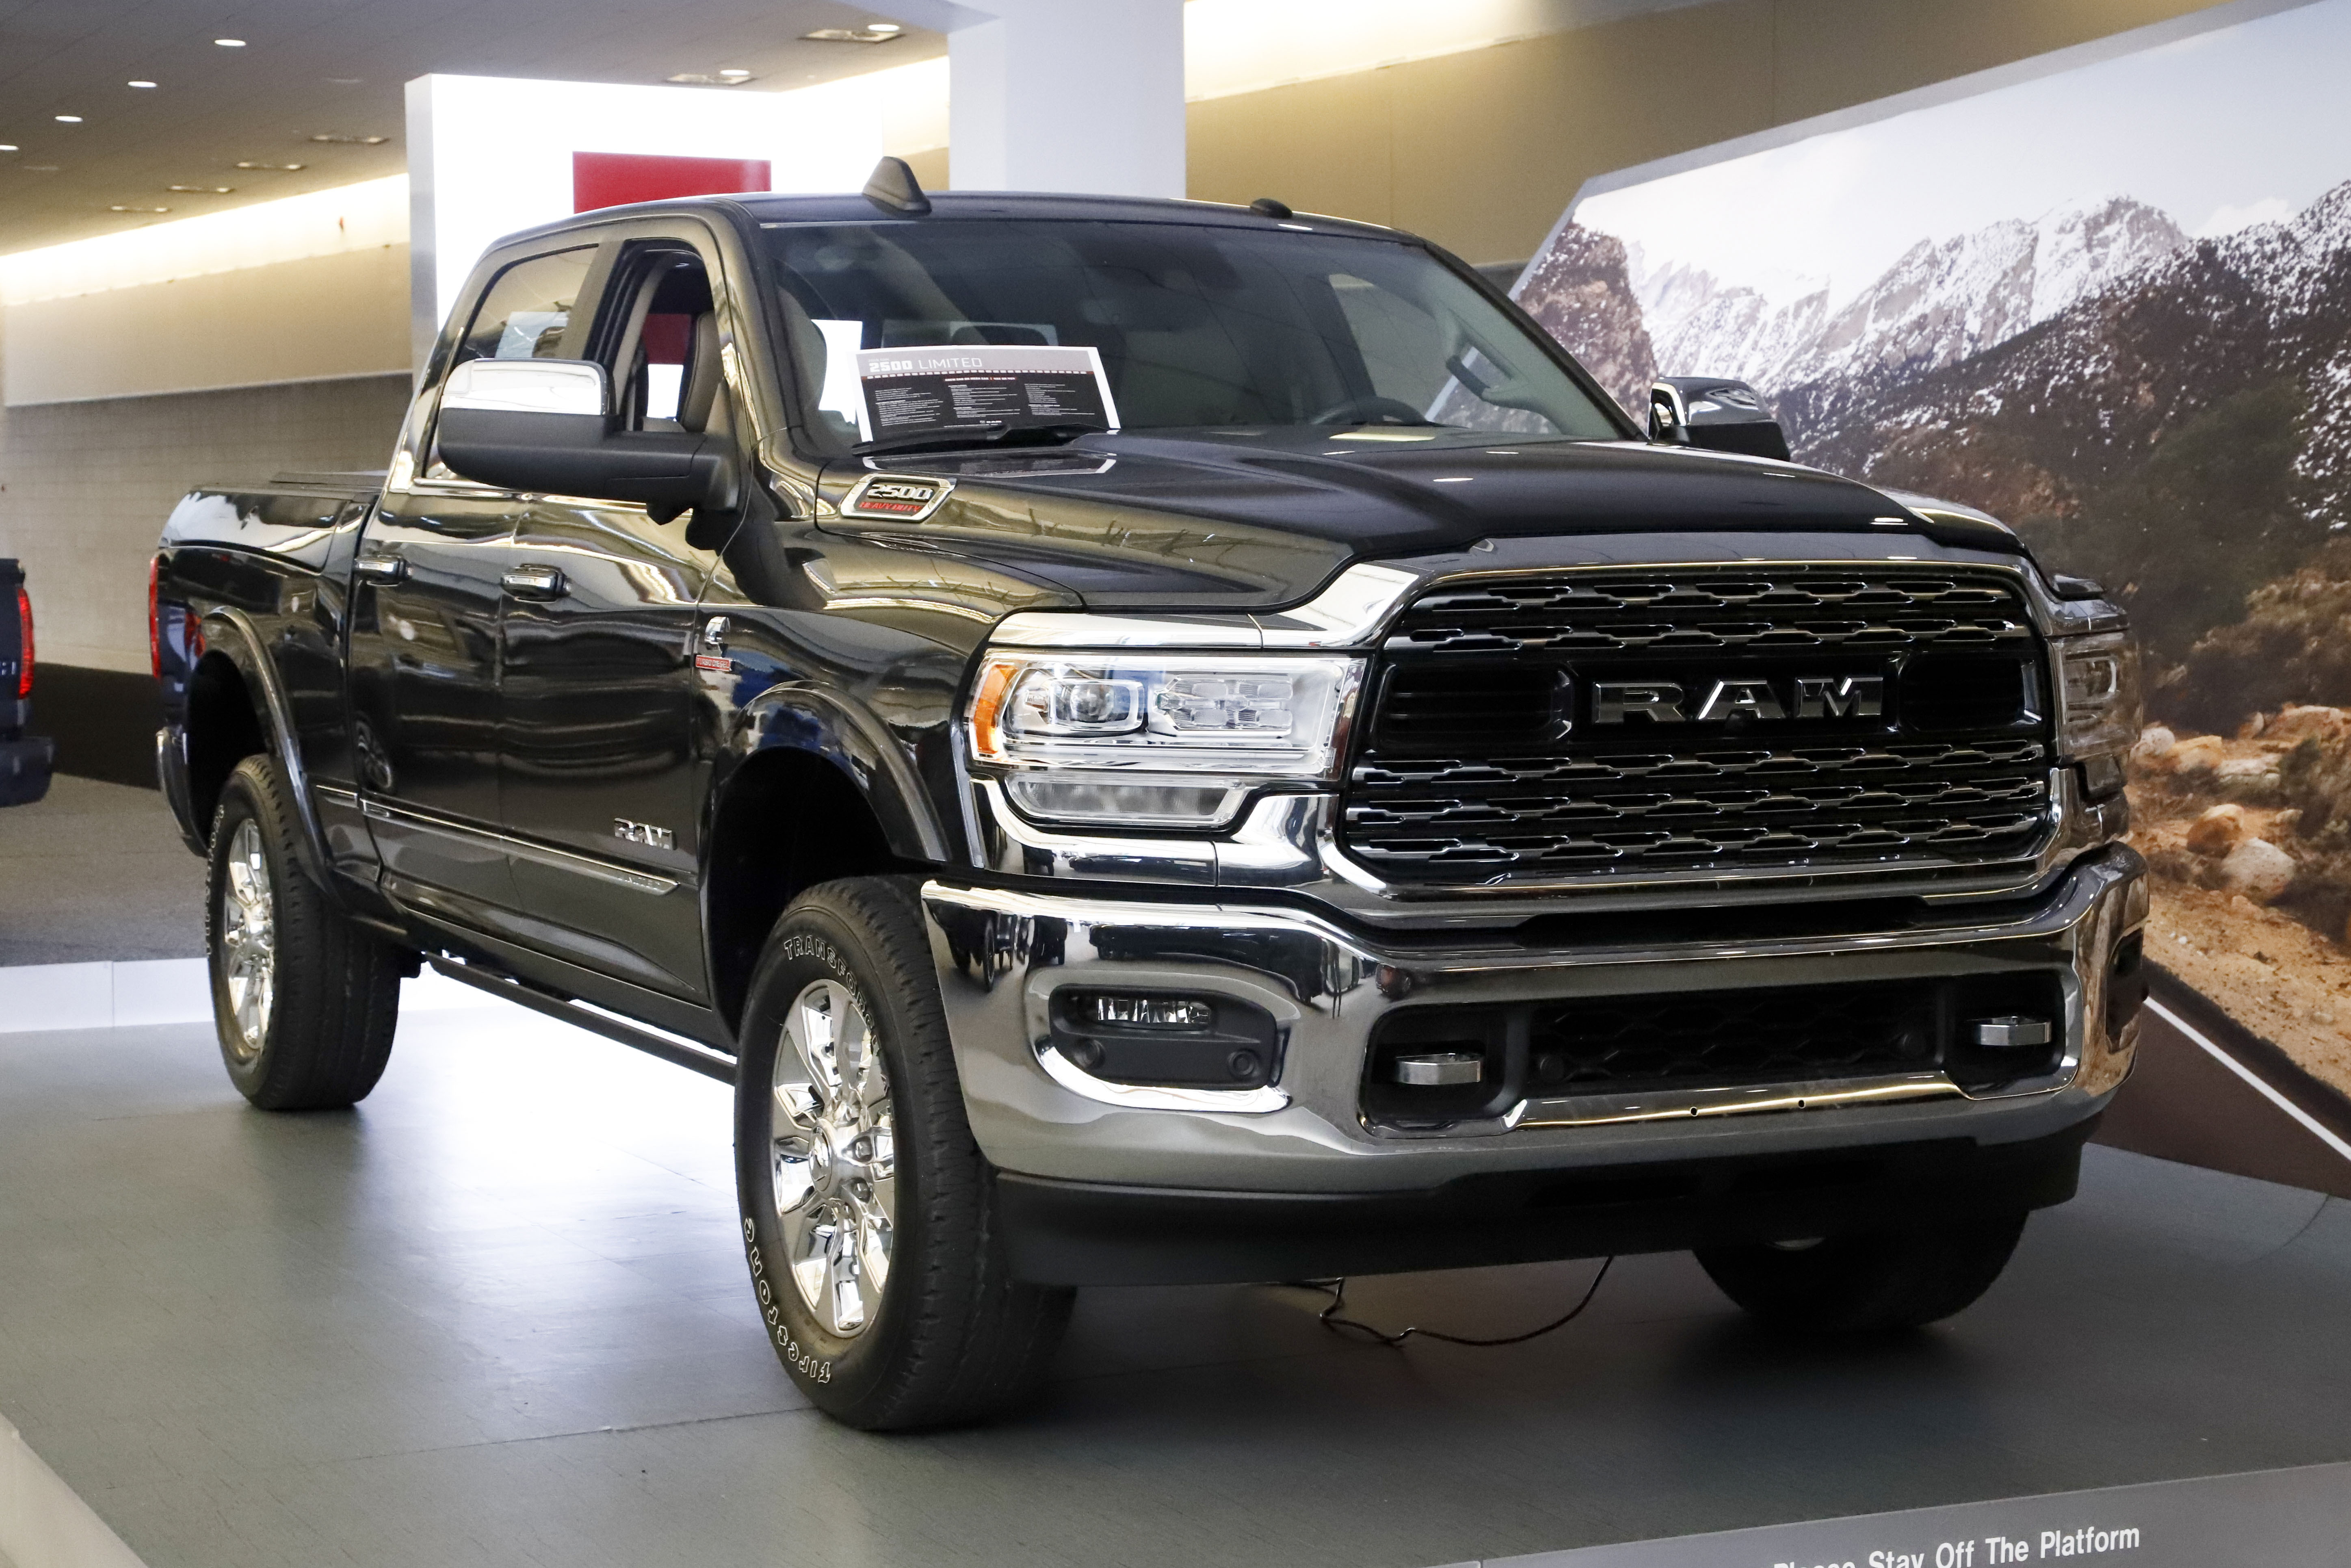 Ram is working on an electric version of its popular pickup truck